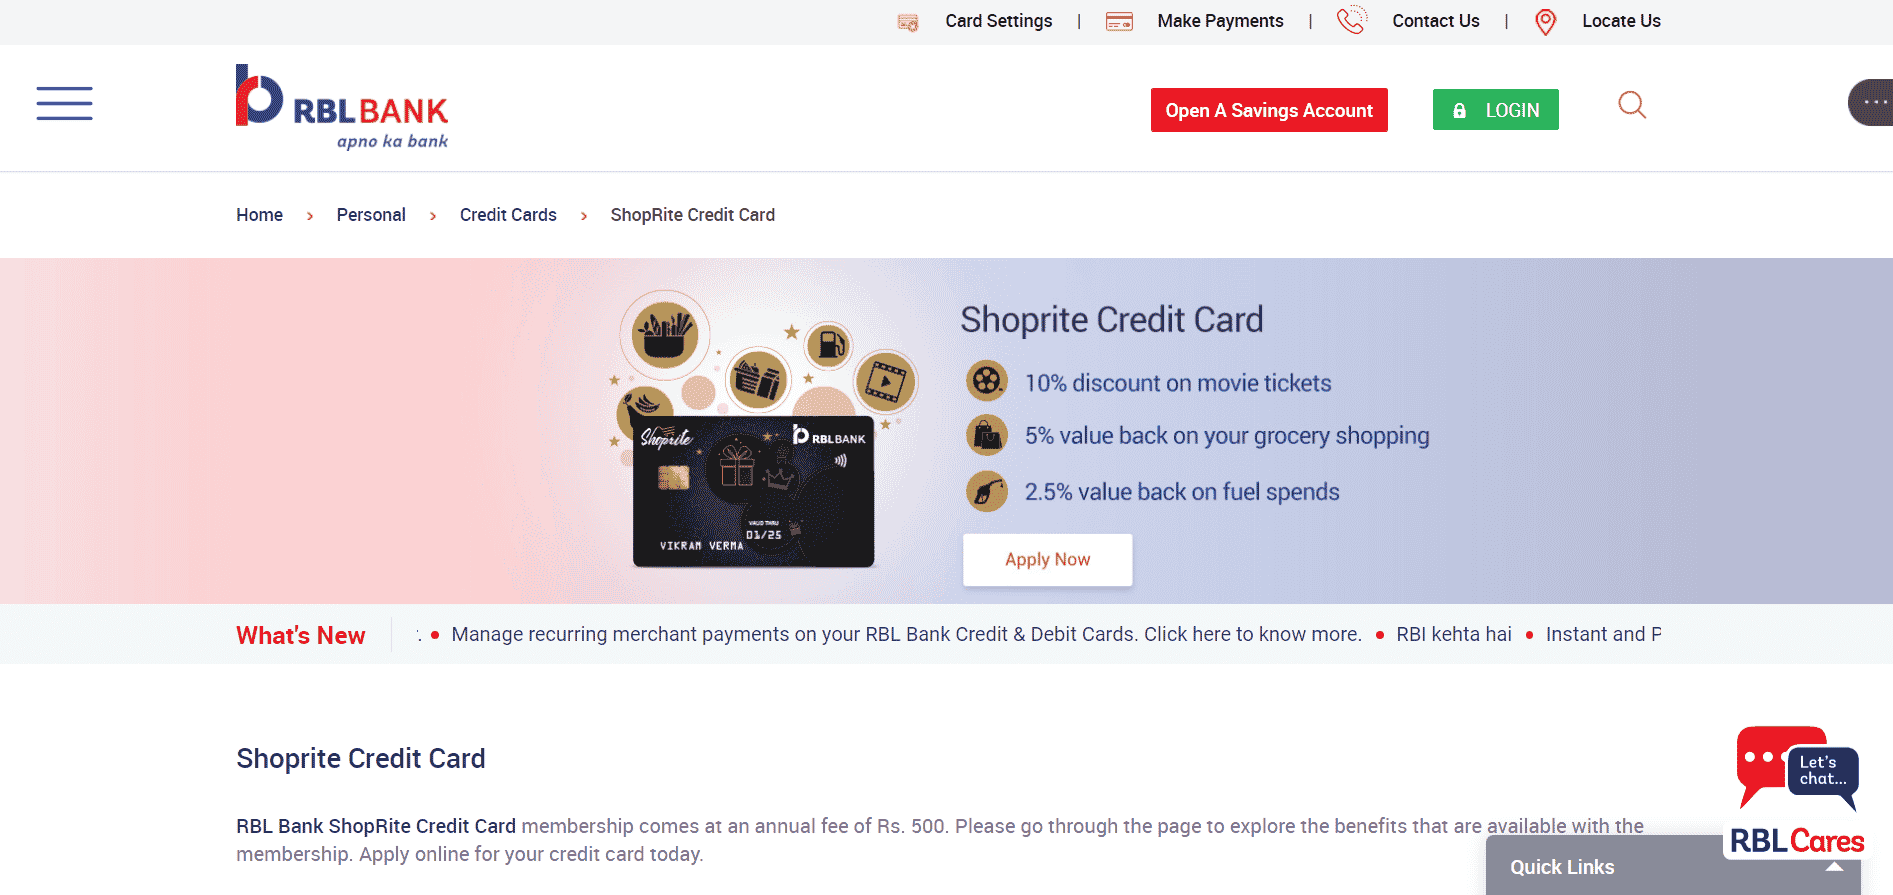 RBL Bank ShopRite Credit Card | Best Credit Card in India 2022